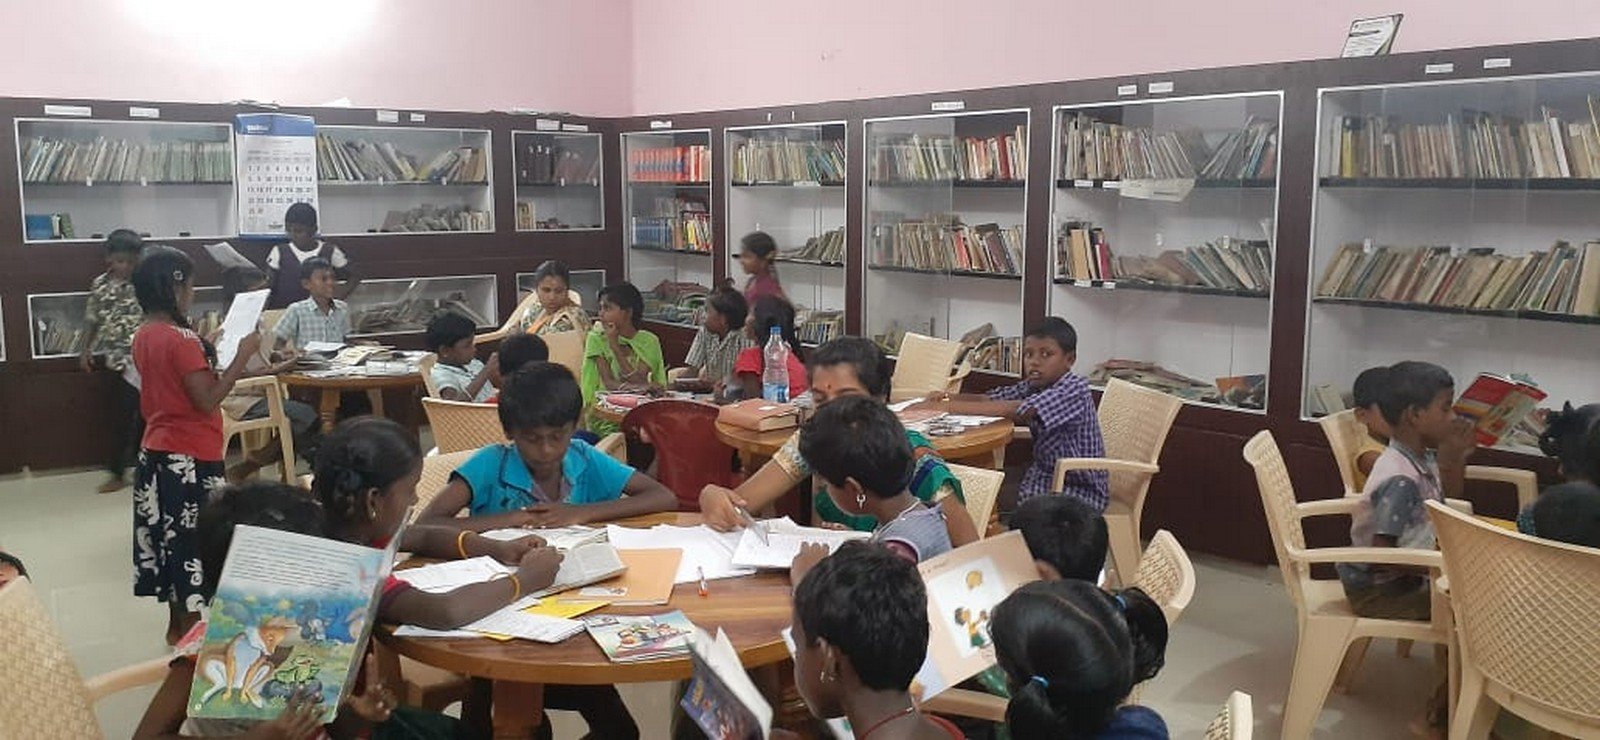 Reading class - Library